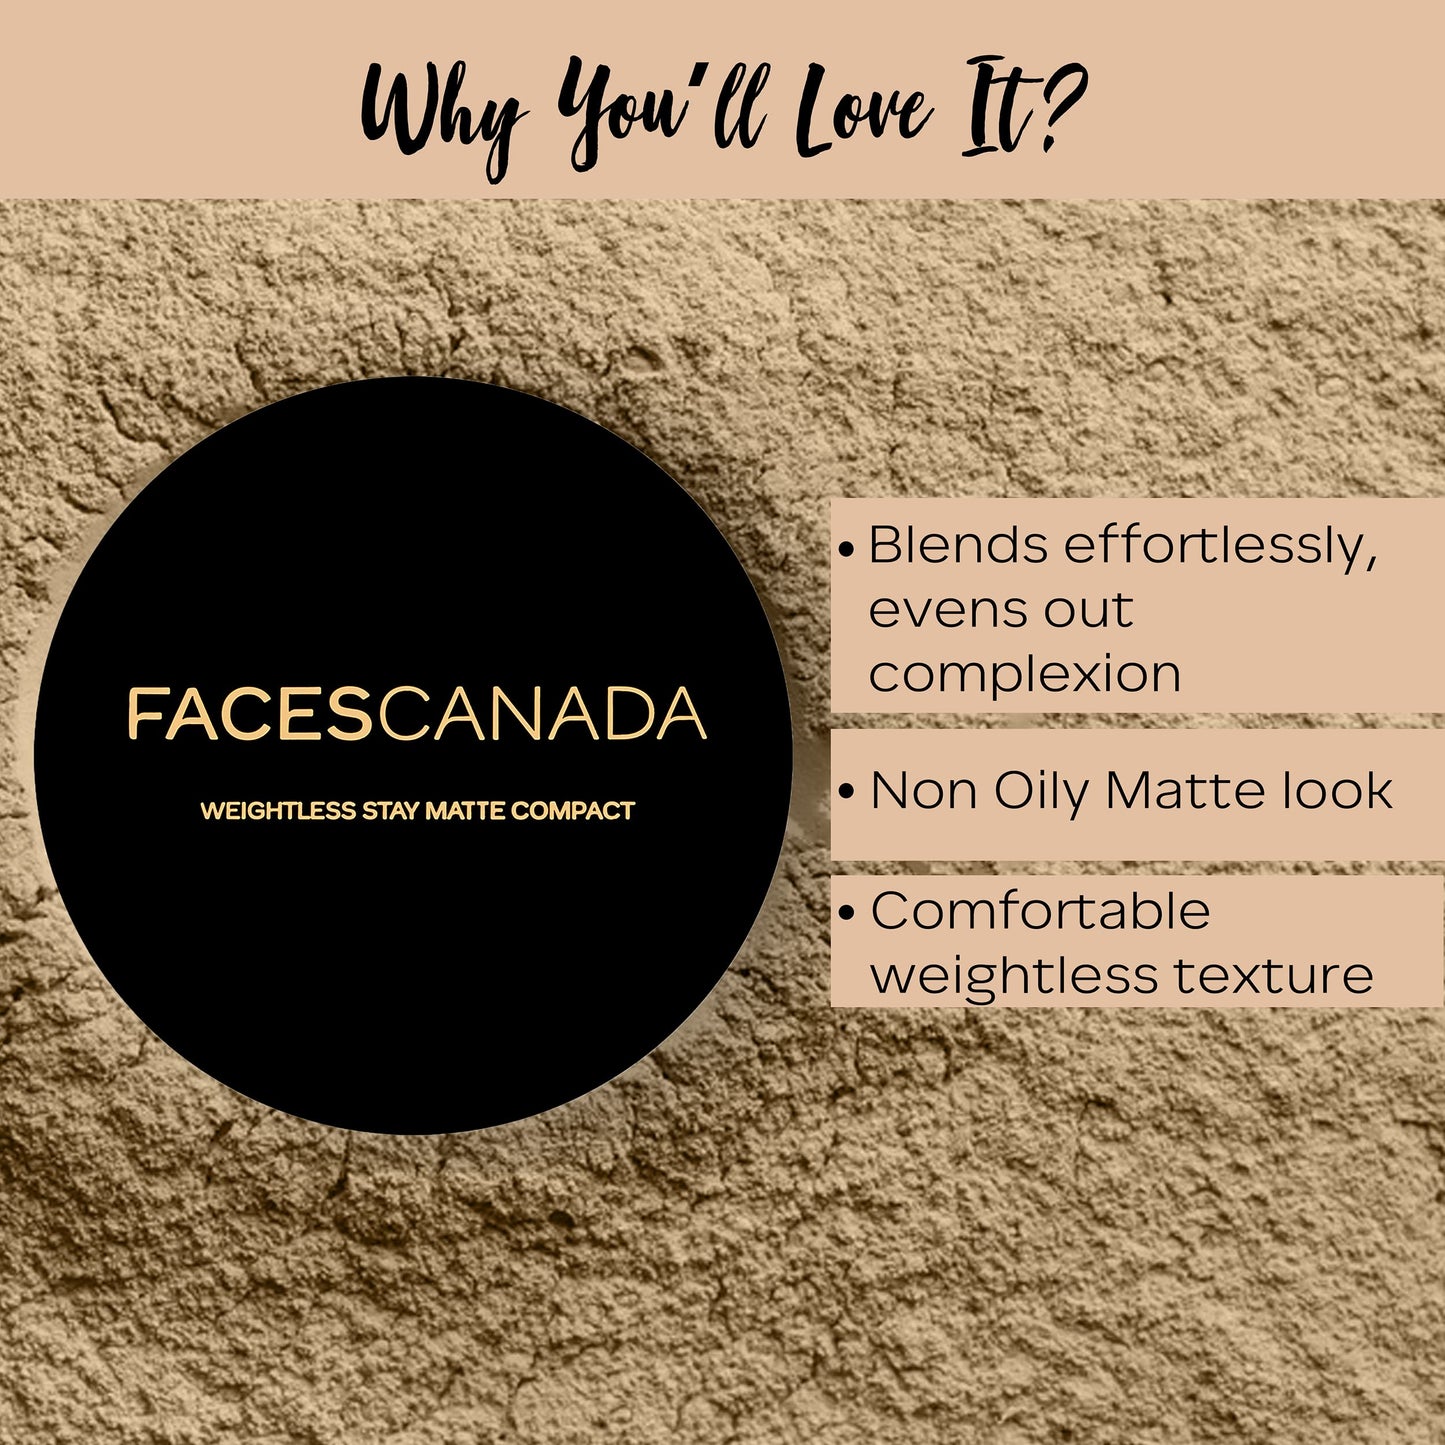 Faces Canada Weightless Stay Matte Compact Vitamin E & Shea Butter, Spf 20 Natural 02, 9 g & Faces Canada Weightless Matte Finish Foundation Mini 18 ml, Ivory 01, 1 count 